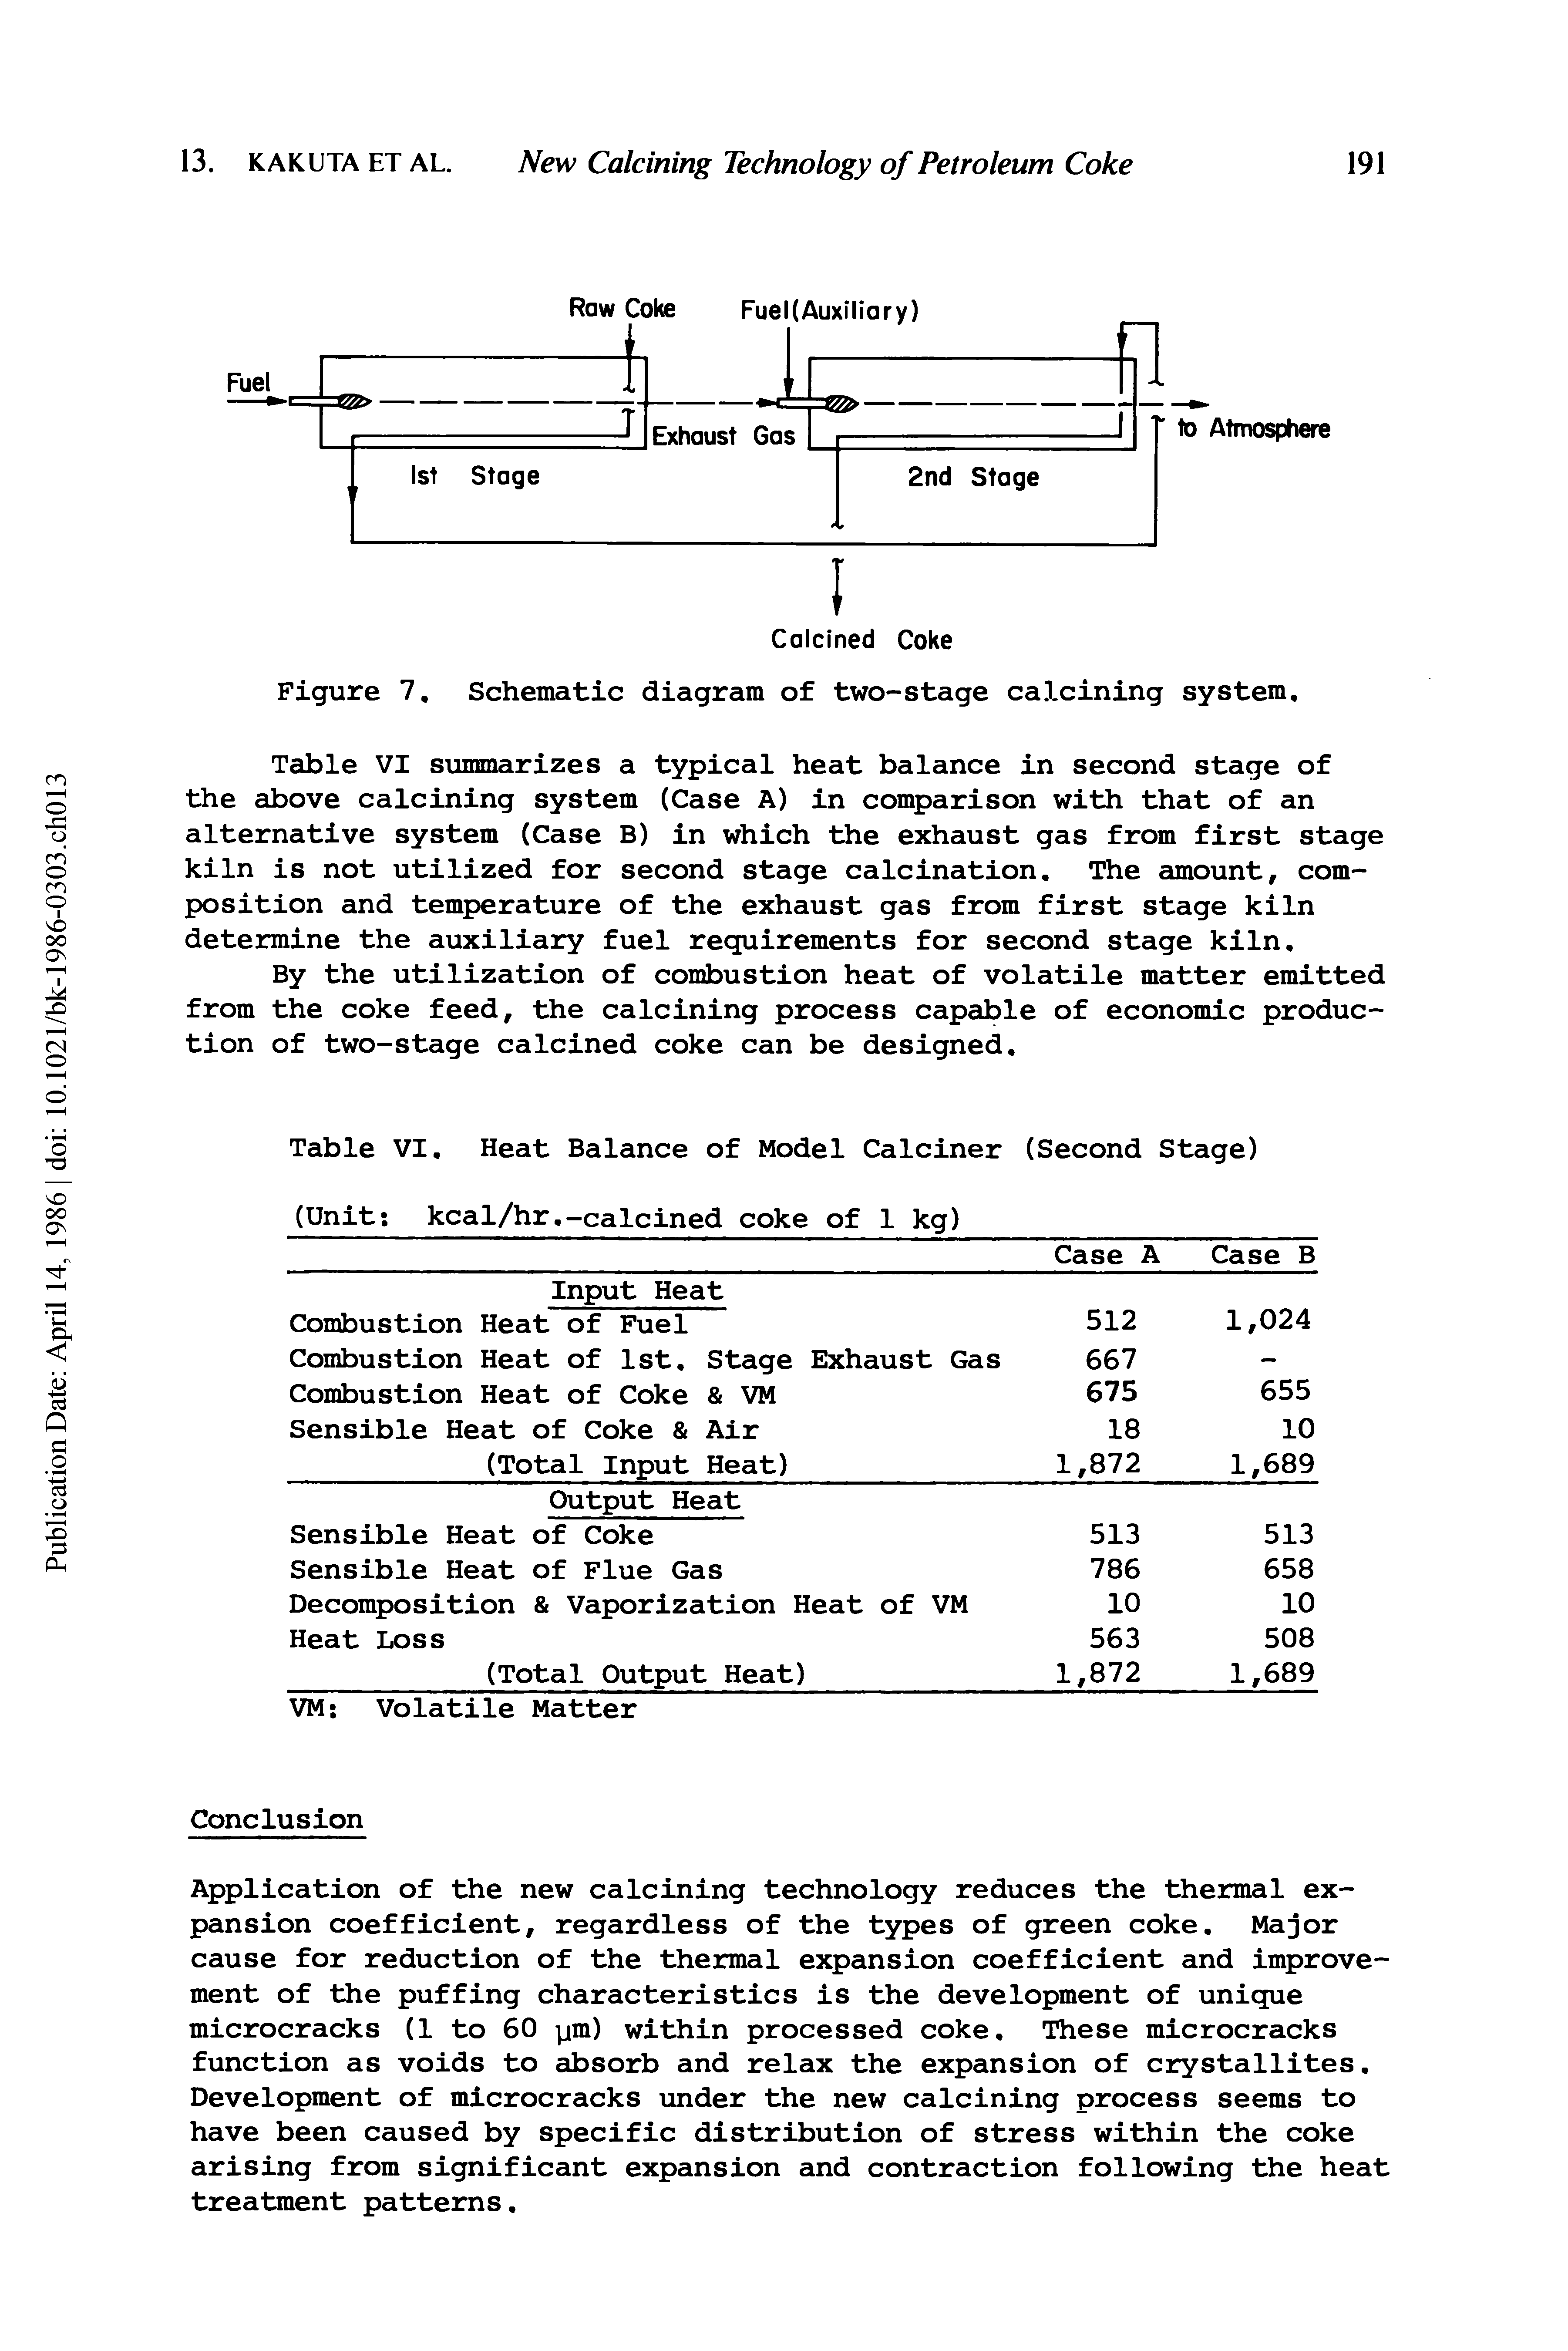 Table VI summarizes a typical heat balance in second stage of the above calcining system (Case A) in comparison with that of an alternative system (Case B) in which the exhaust gas from first stage kiln is not utilized for second stage calcination. The amount, composition and temperature of the exhaust gas from first stage kiln determine the auxiliary fuel requirements for second stage kiln.